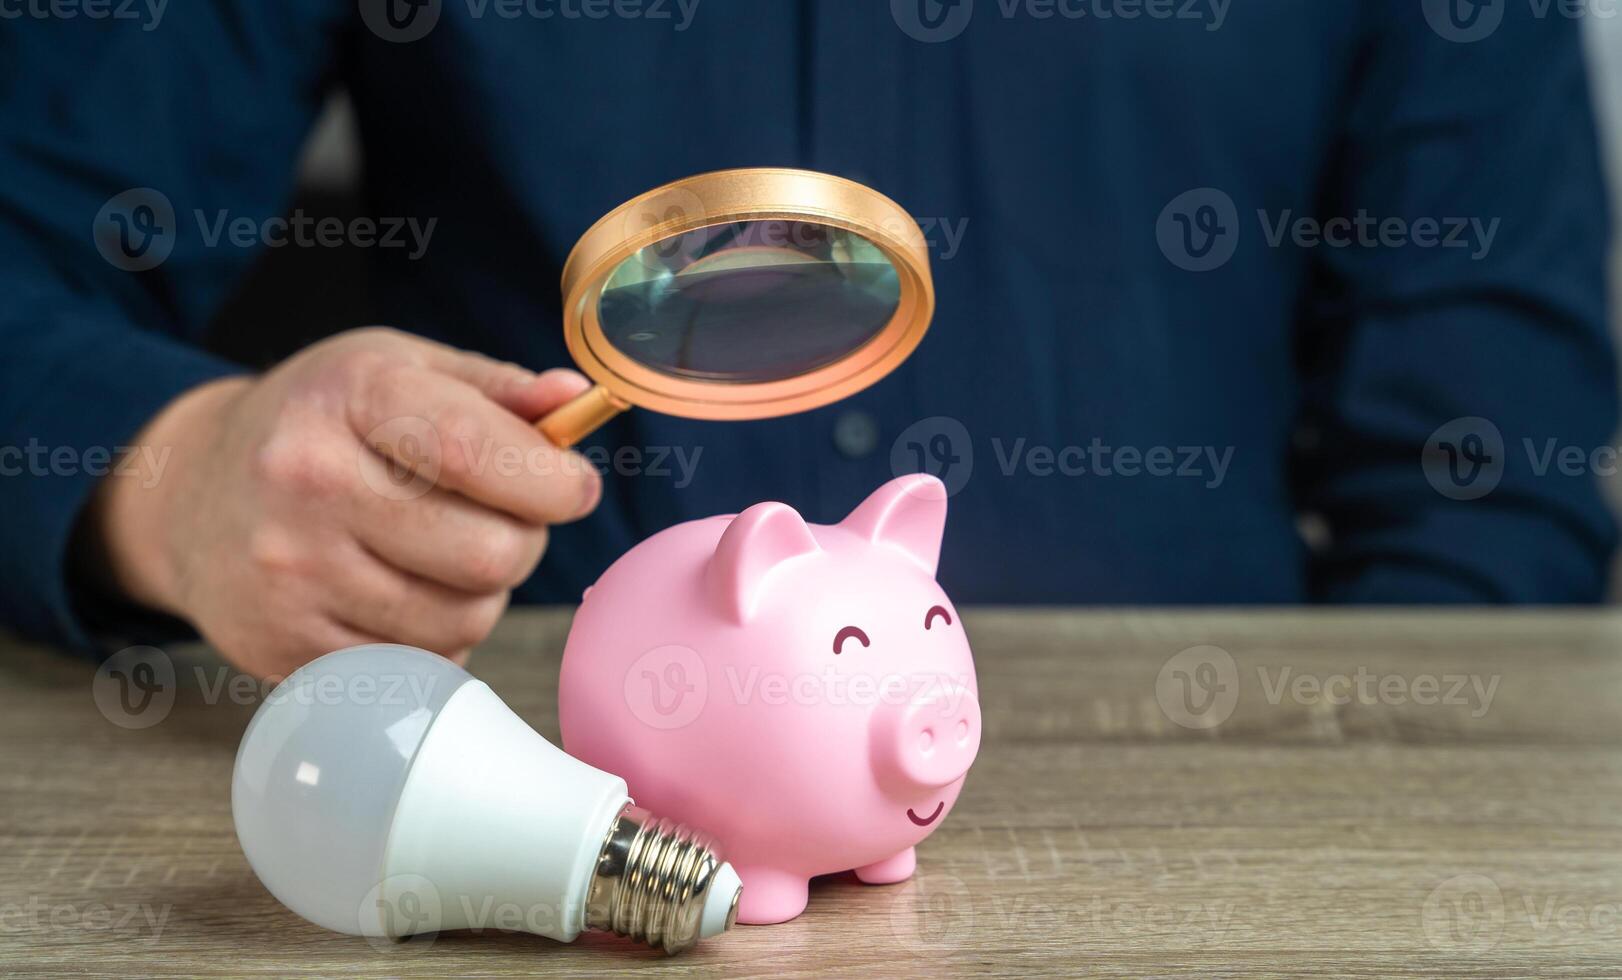 Assess the effectiveness of saving on electricity. Energy efficiency. Low energy consumption, high productivity. Saving on household bills. How to save money. photo